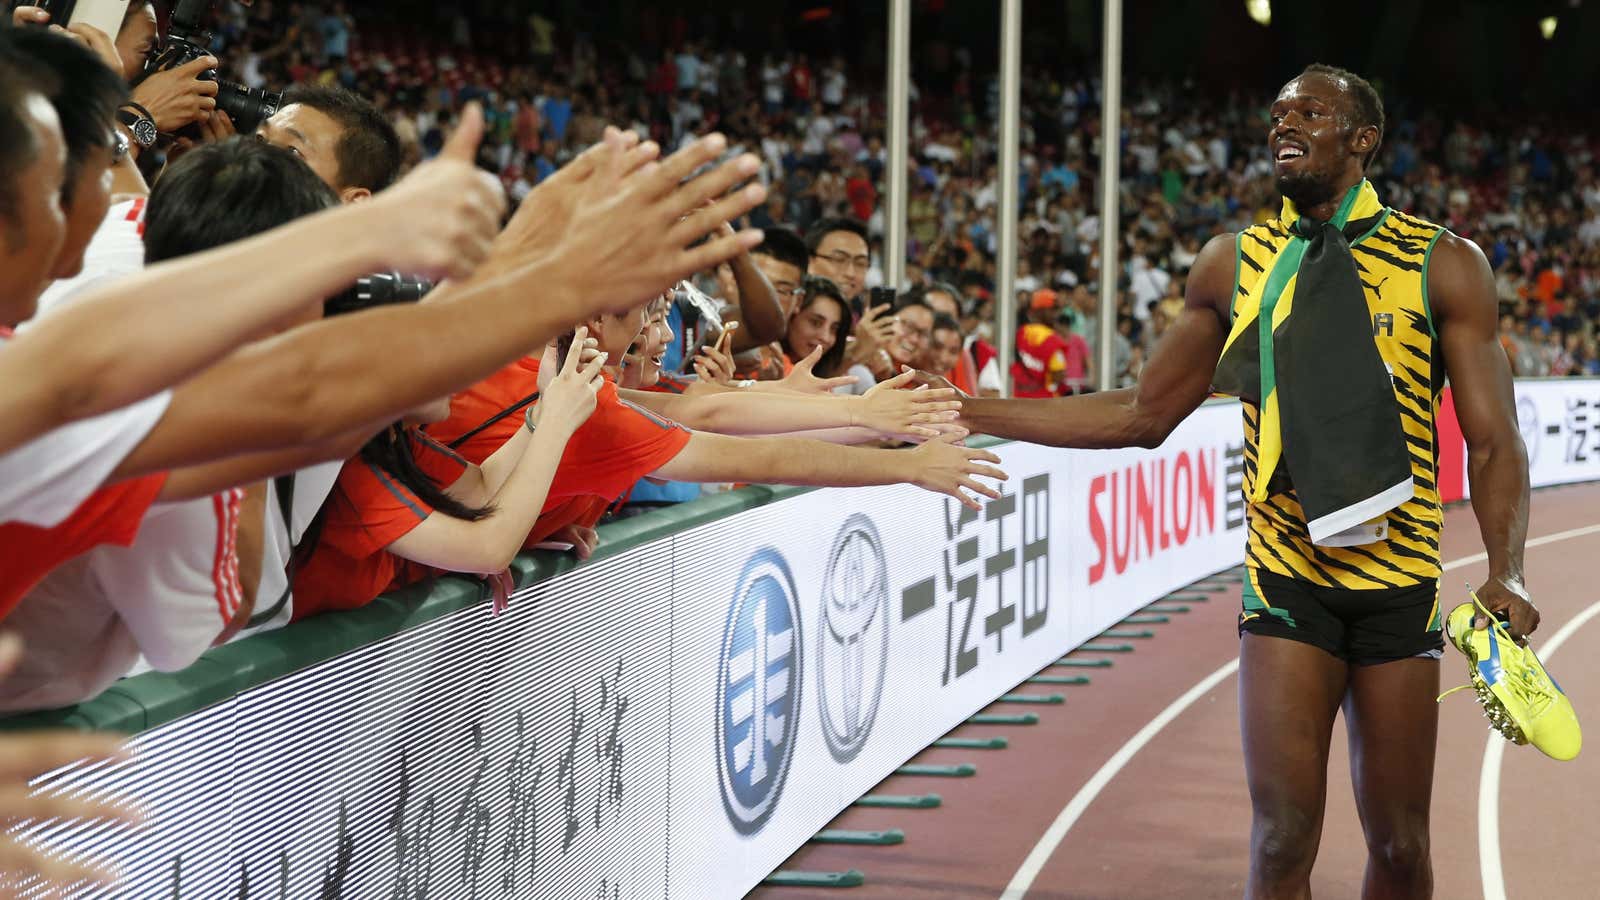 Can Usain Bolt outrun Bob Marley to become Jamaica’s main cultural export?